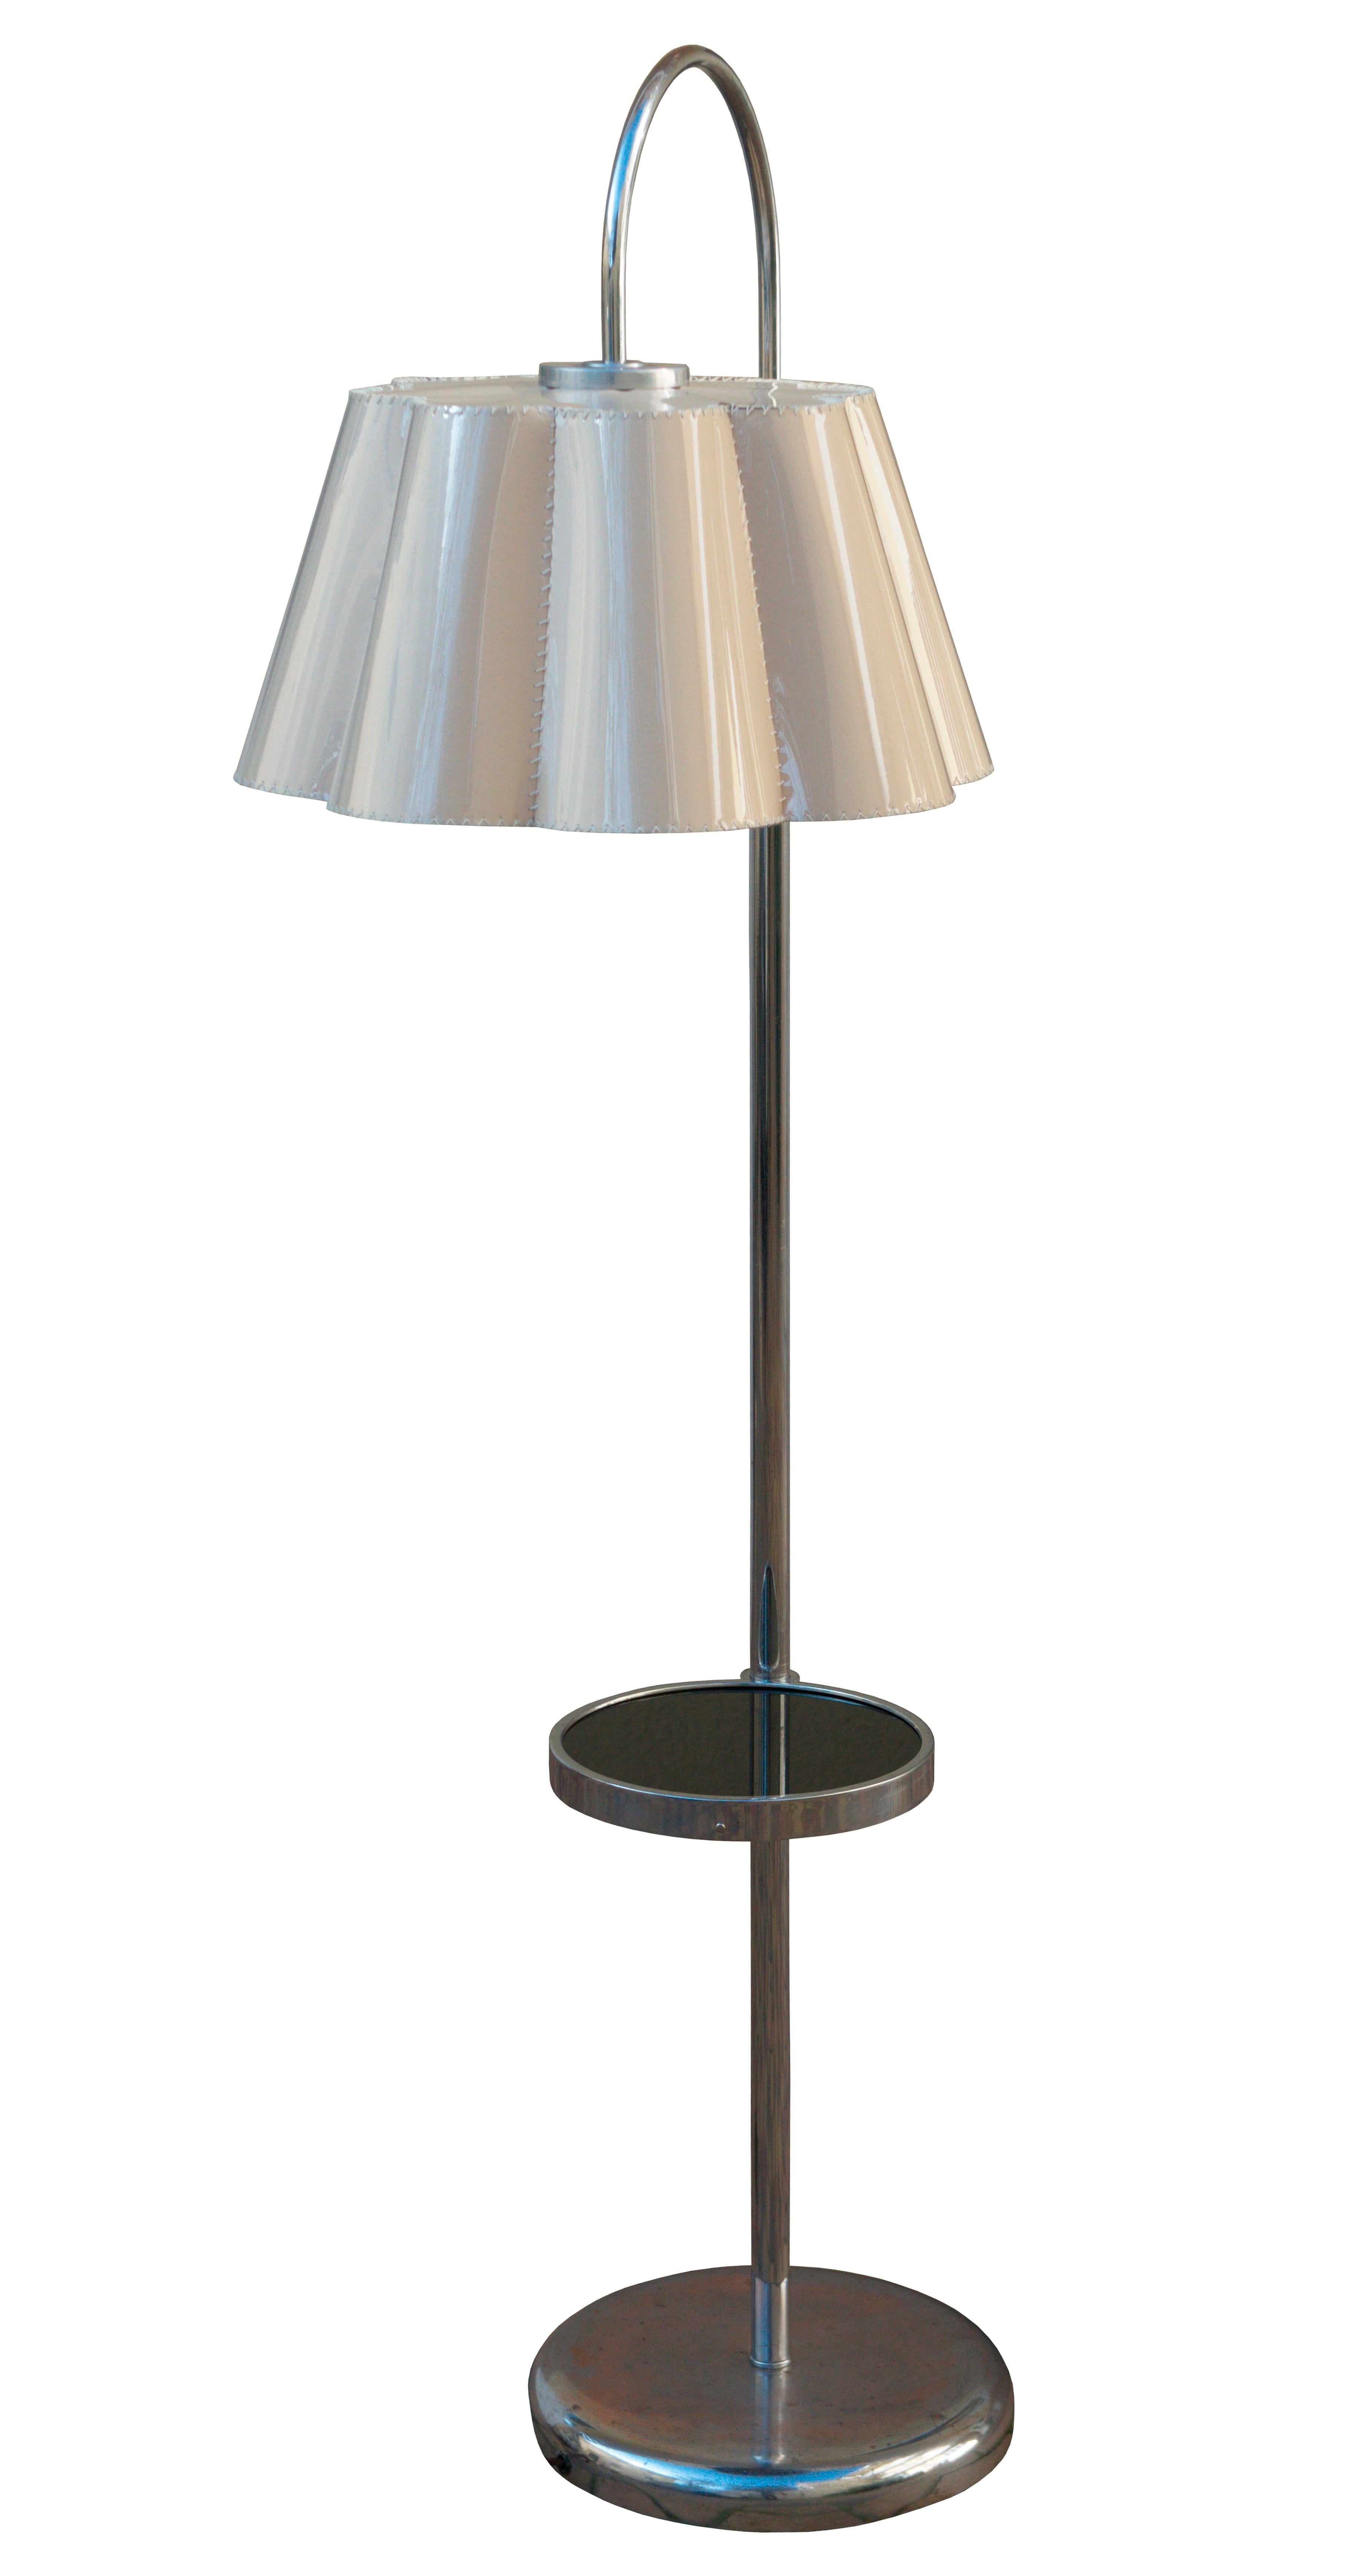 This Modernist floor lamp was designed and produced by The NAPAKO Company in the 1930s Czechoslovakia. 

The piece represents perfectly the Modernist approach to furniture design. Its minimalist, functional and elegant; a perfect companion for